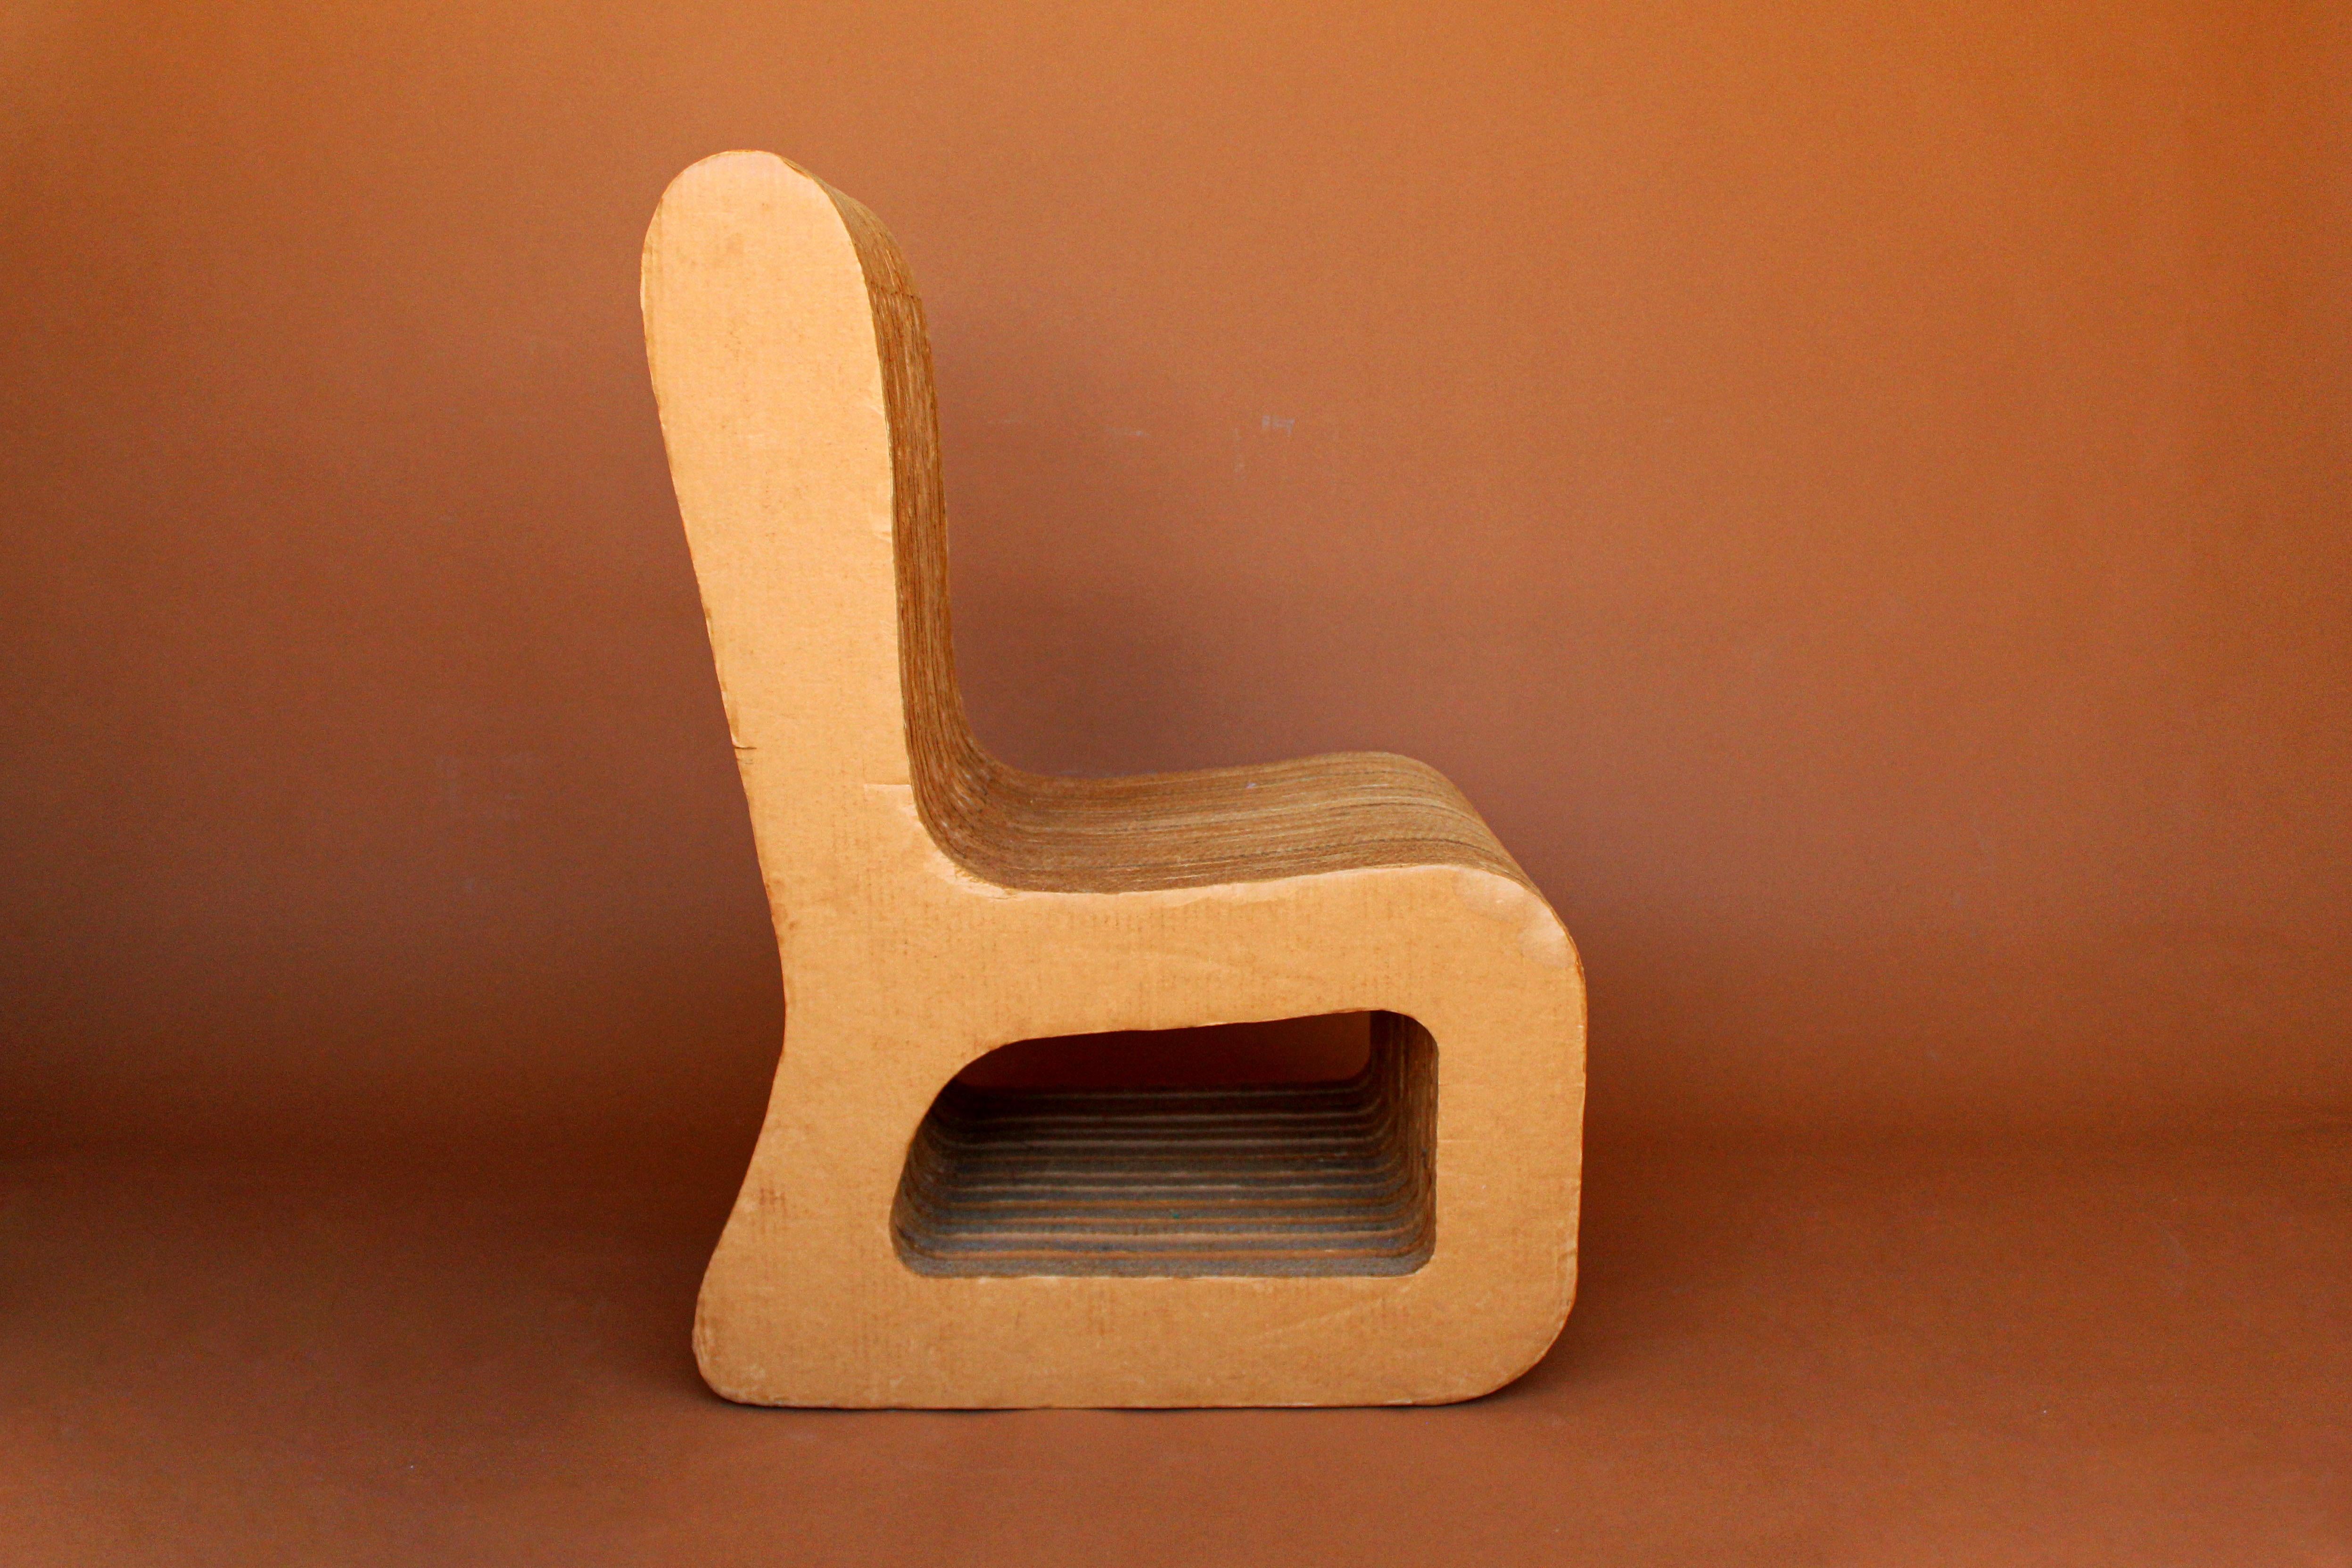 Special one of a kind post modern cardboard chair in the style of iconic Frank Gehry Wiggle chair for Vitra. We have done extensive research and have unable to find another one like it, many stories of Prototypes and different artists but we prefer